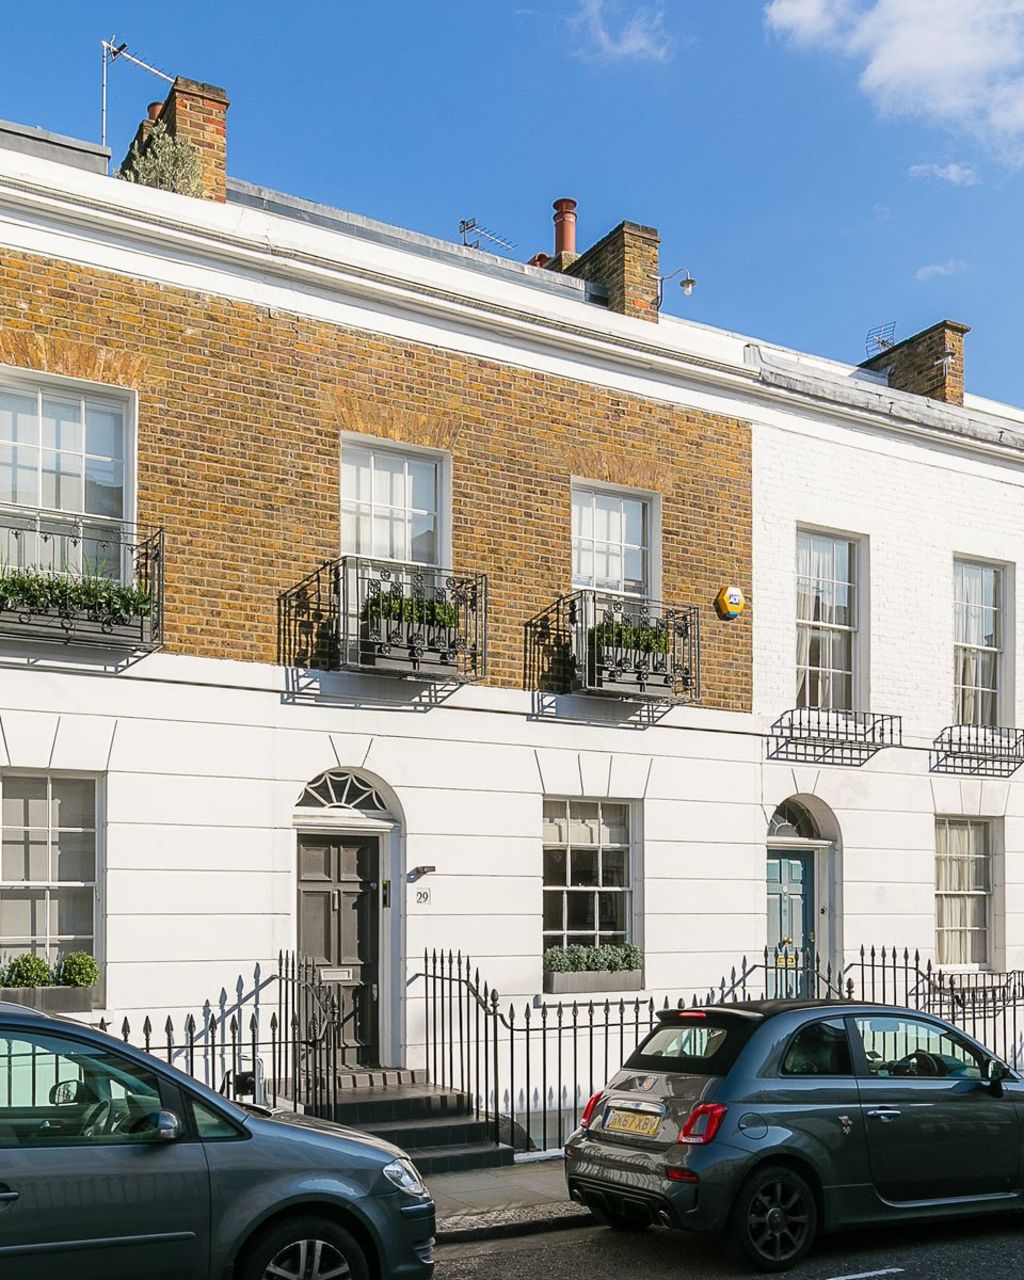 Mary Poppins writer's home has hit the London market